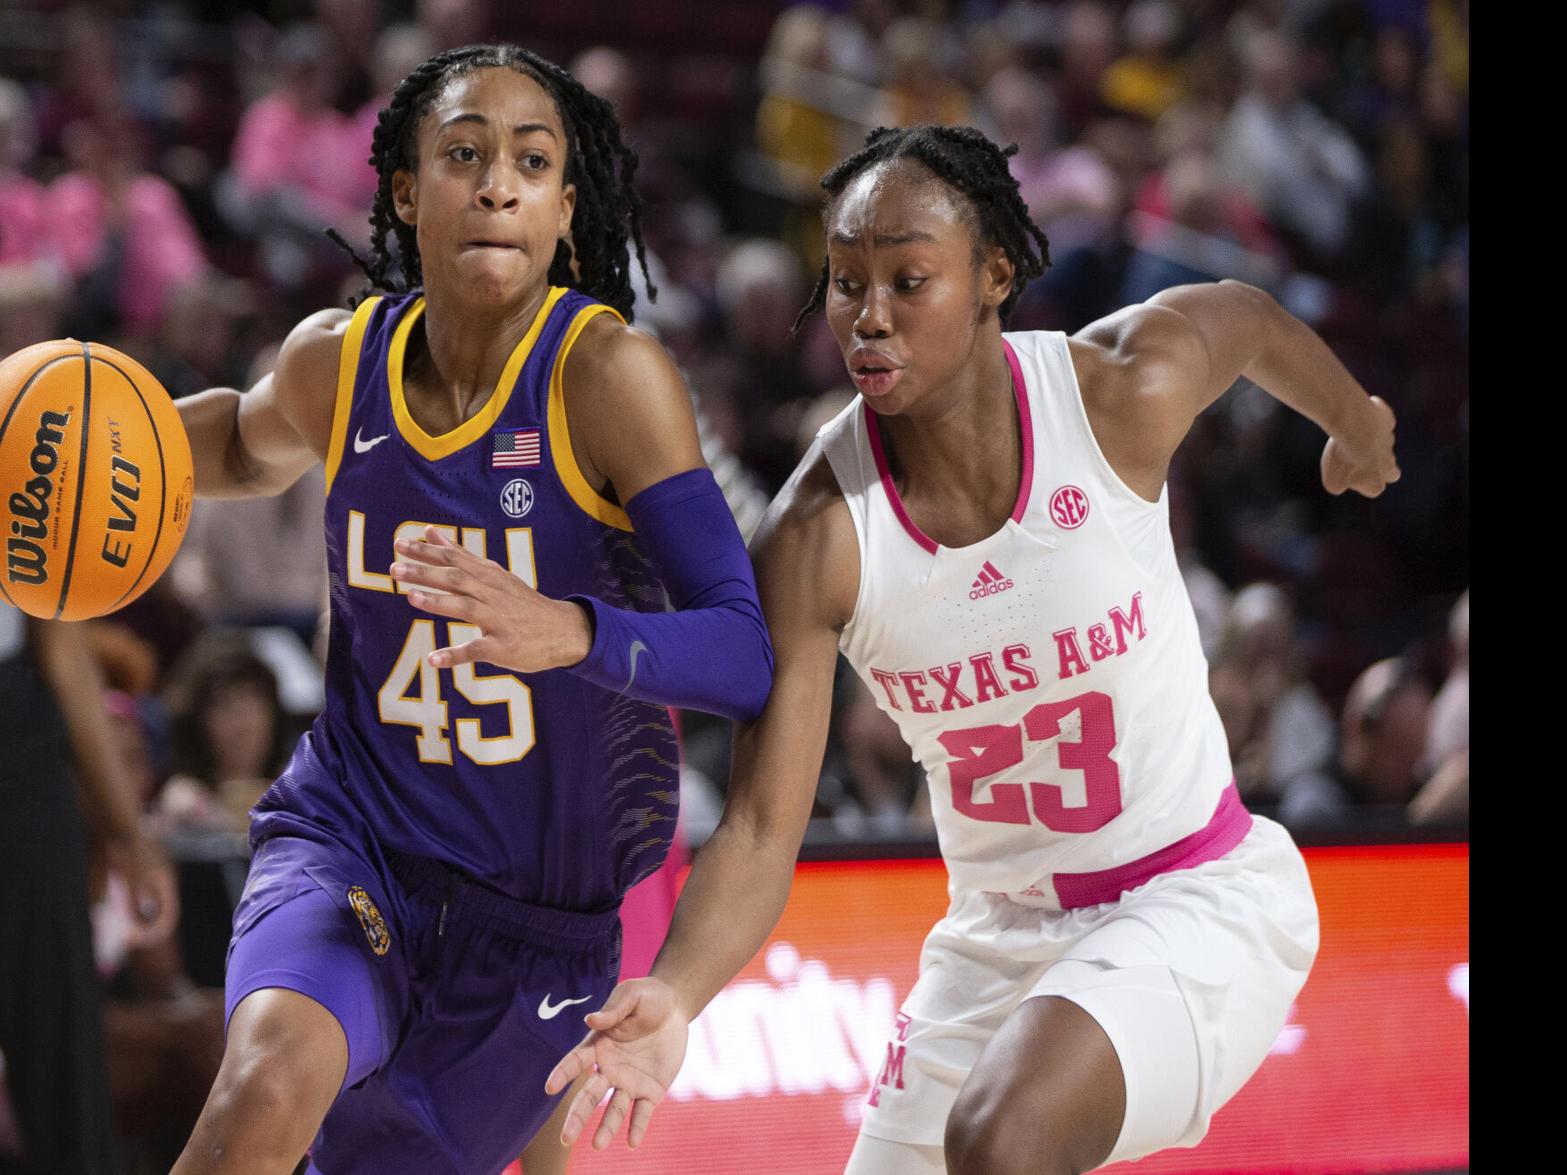 With two-win week, LSU basketball team is back up to 19th in AP